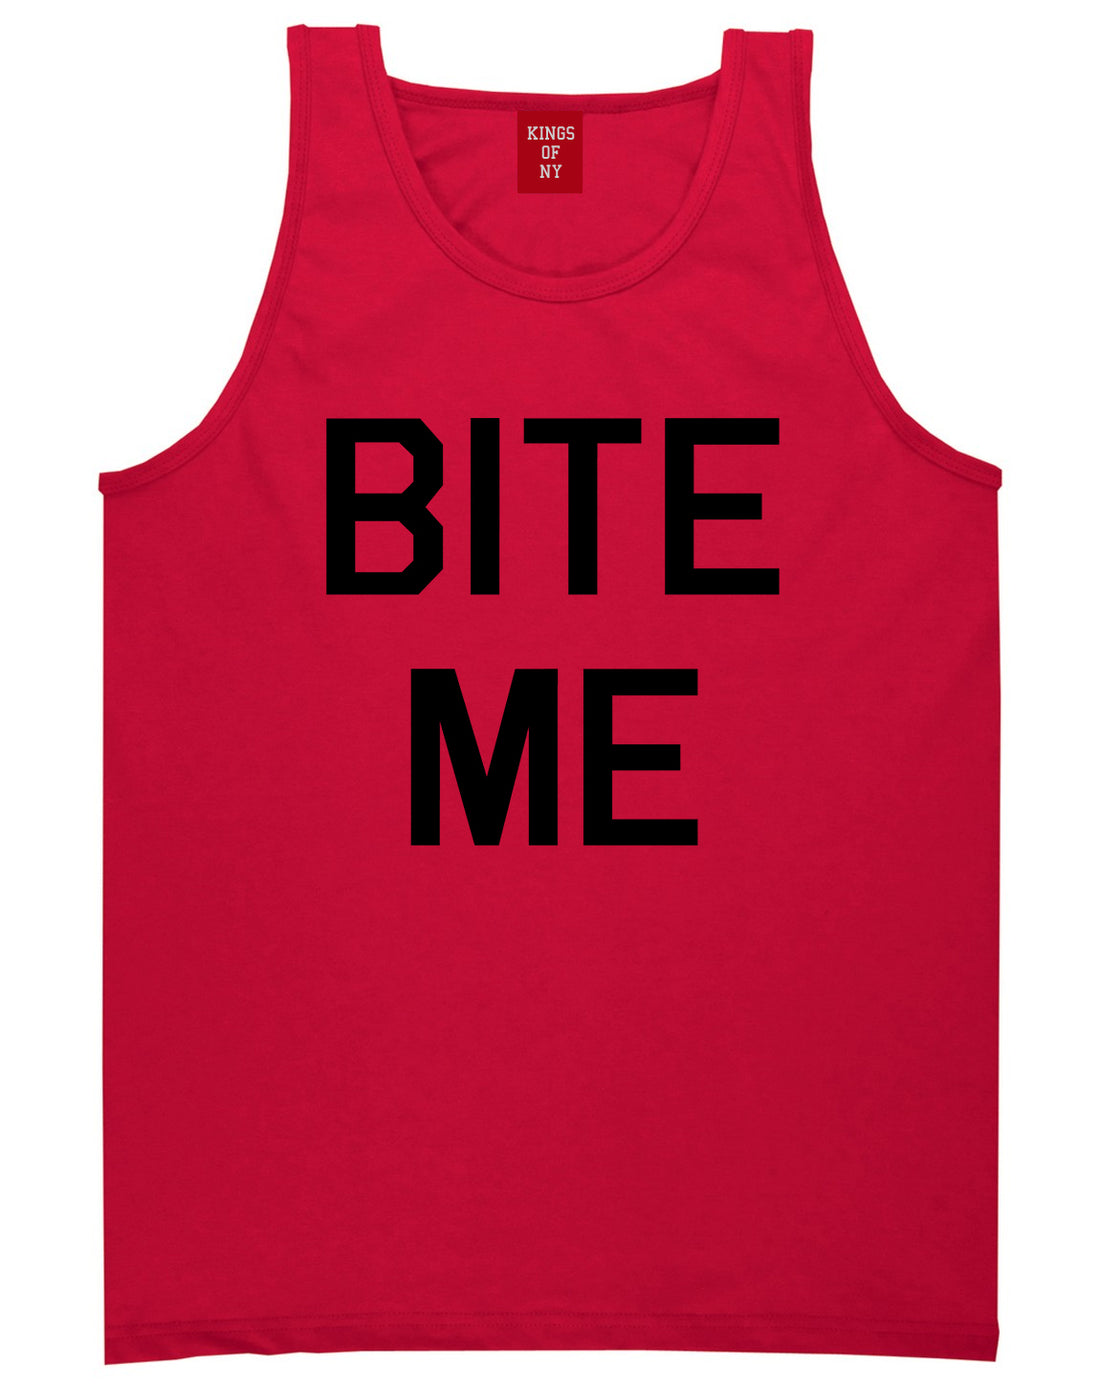 Bite Me Red Tank Top Shirt by Kings Of NY